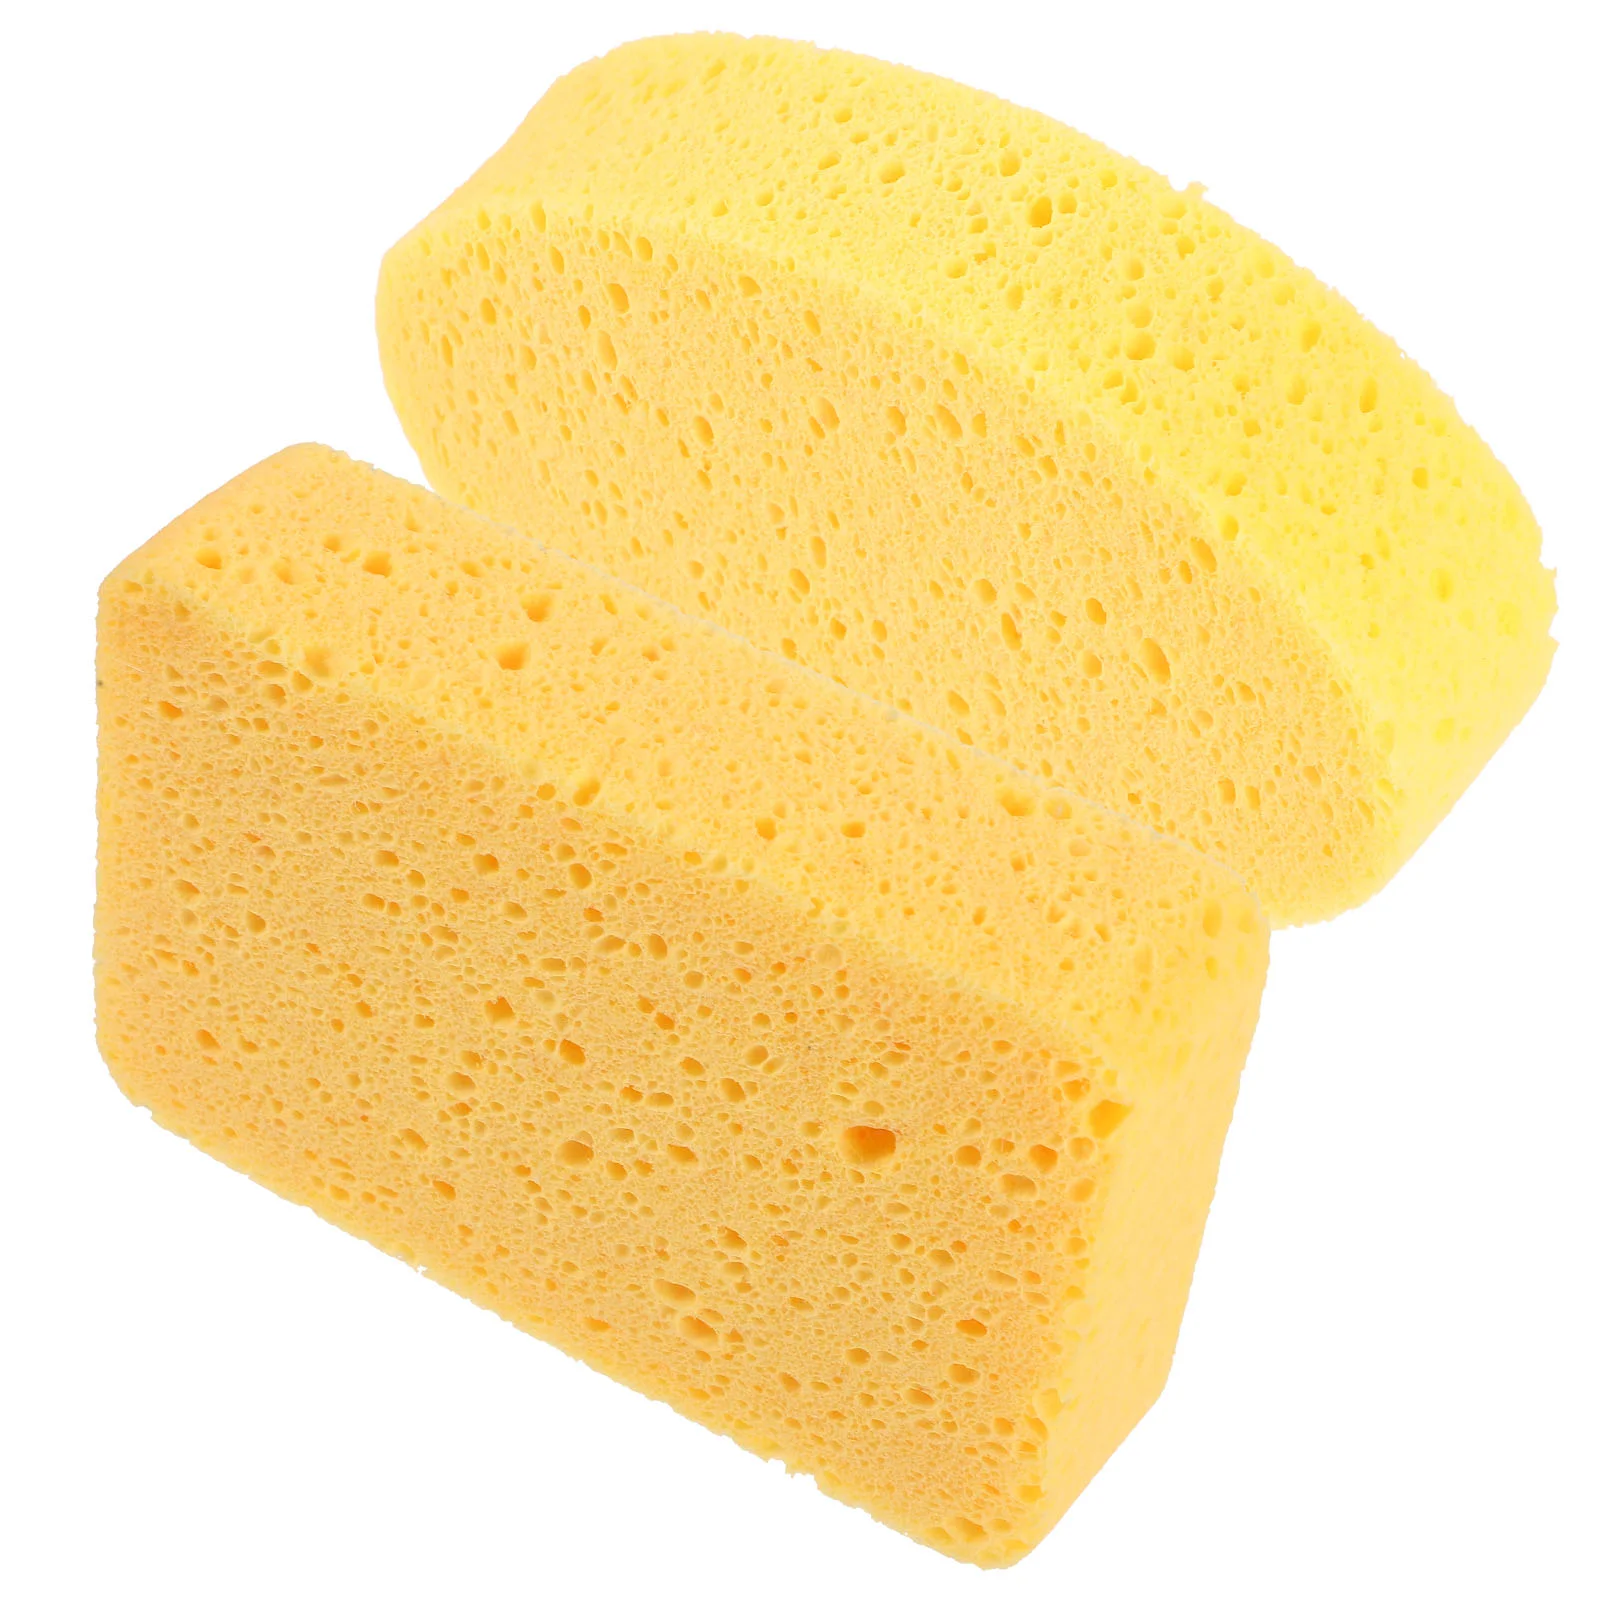 

Wood Pulp Sponge Reusable Cleaning Small Dish Daily Use Wok Compact Scrub Sponges Kitchen Accessory Household